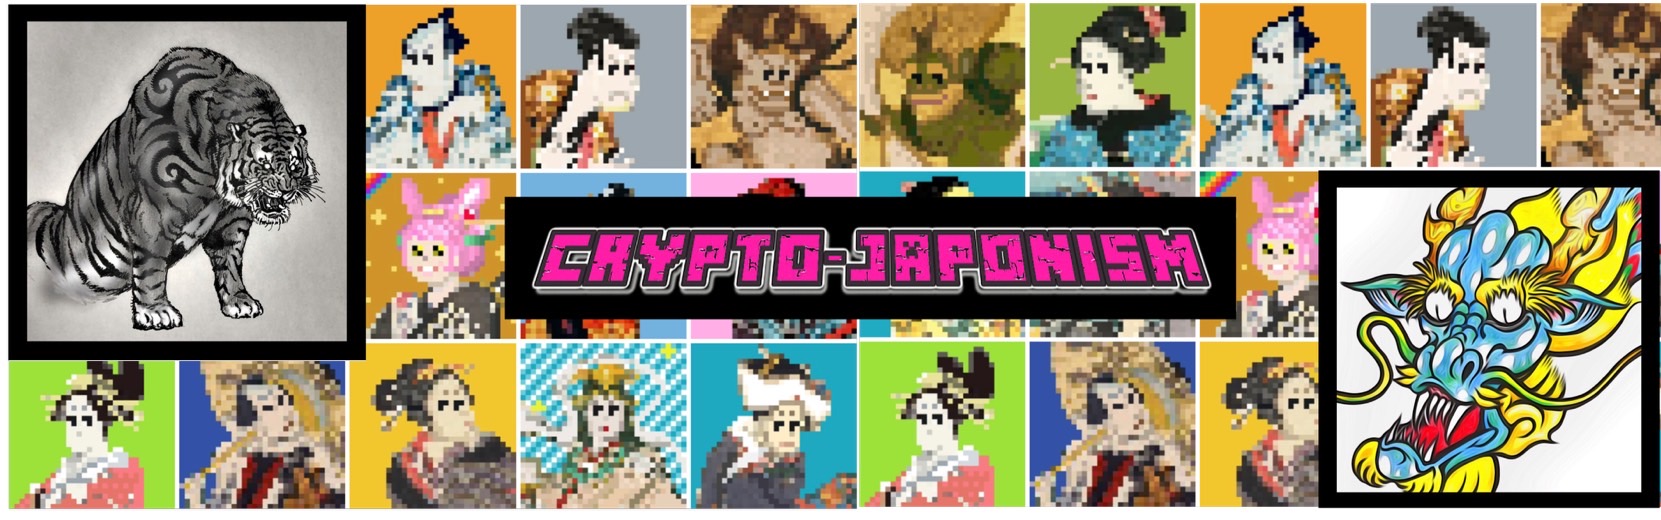 CRYPTO-Japonism banner